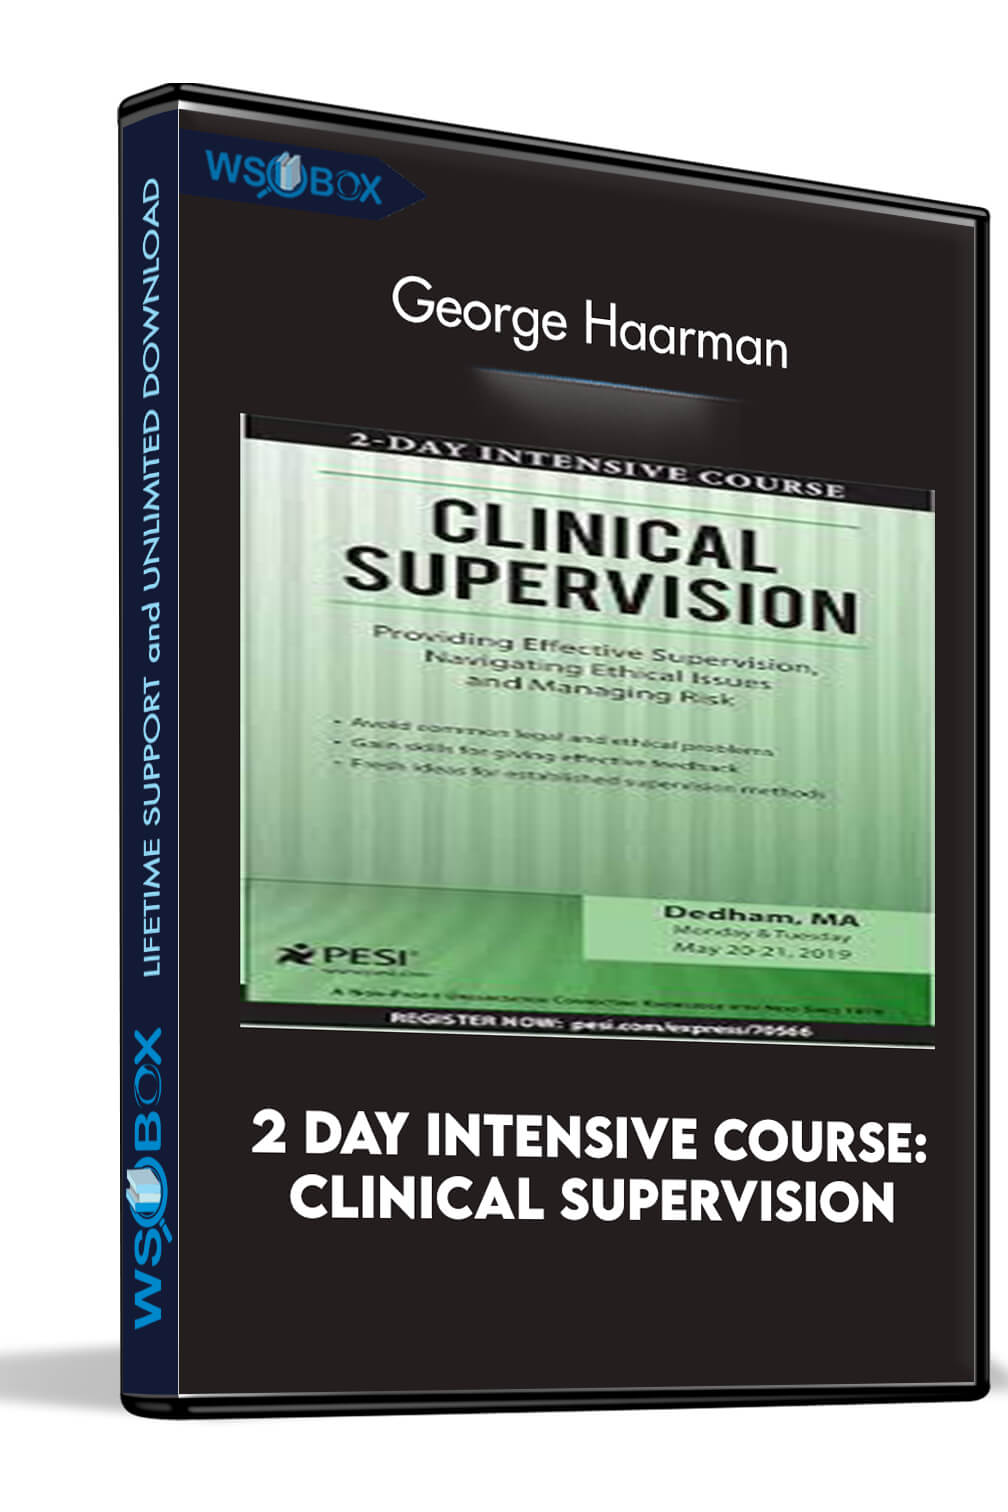 2 Day Intensive Course: Clinical Supervision: Providing Effective Supervision, Navigating Ethical Issues and Managing Risk - George Haarman